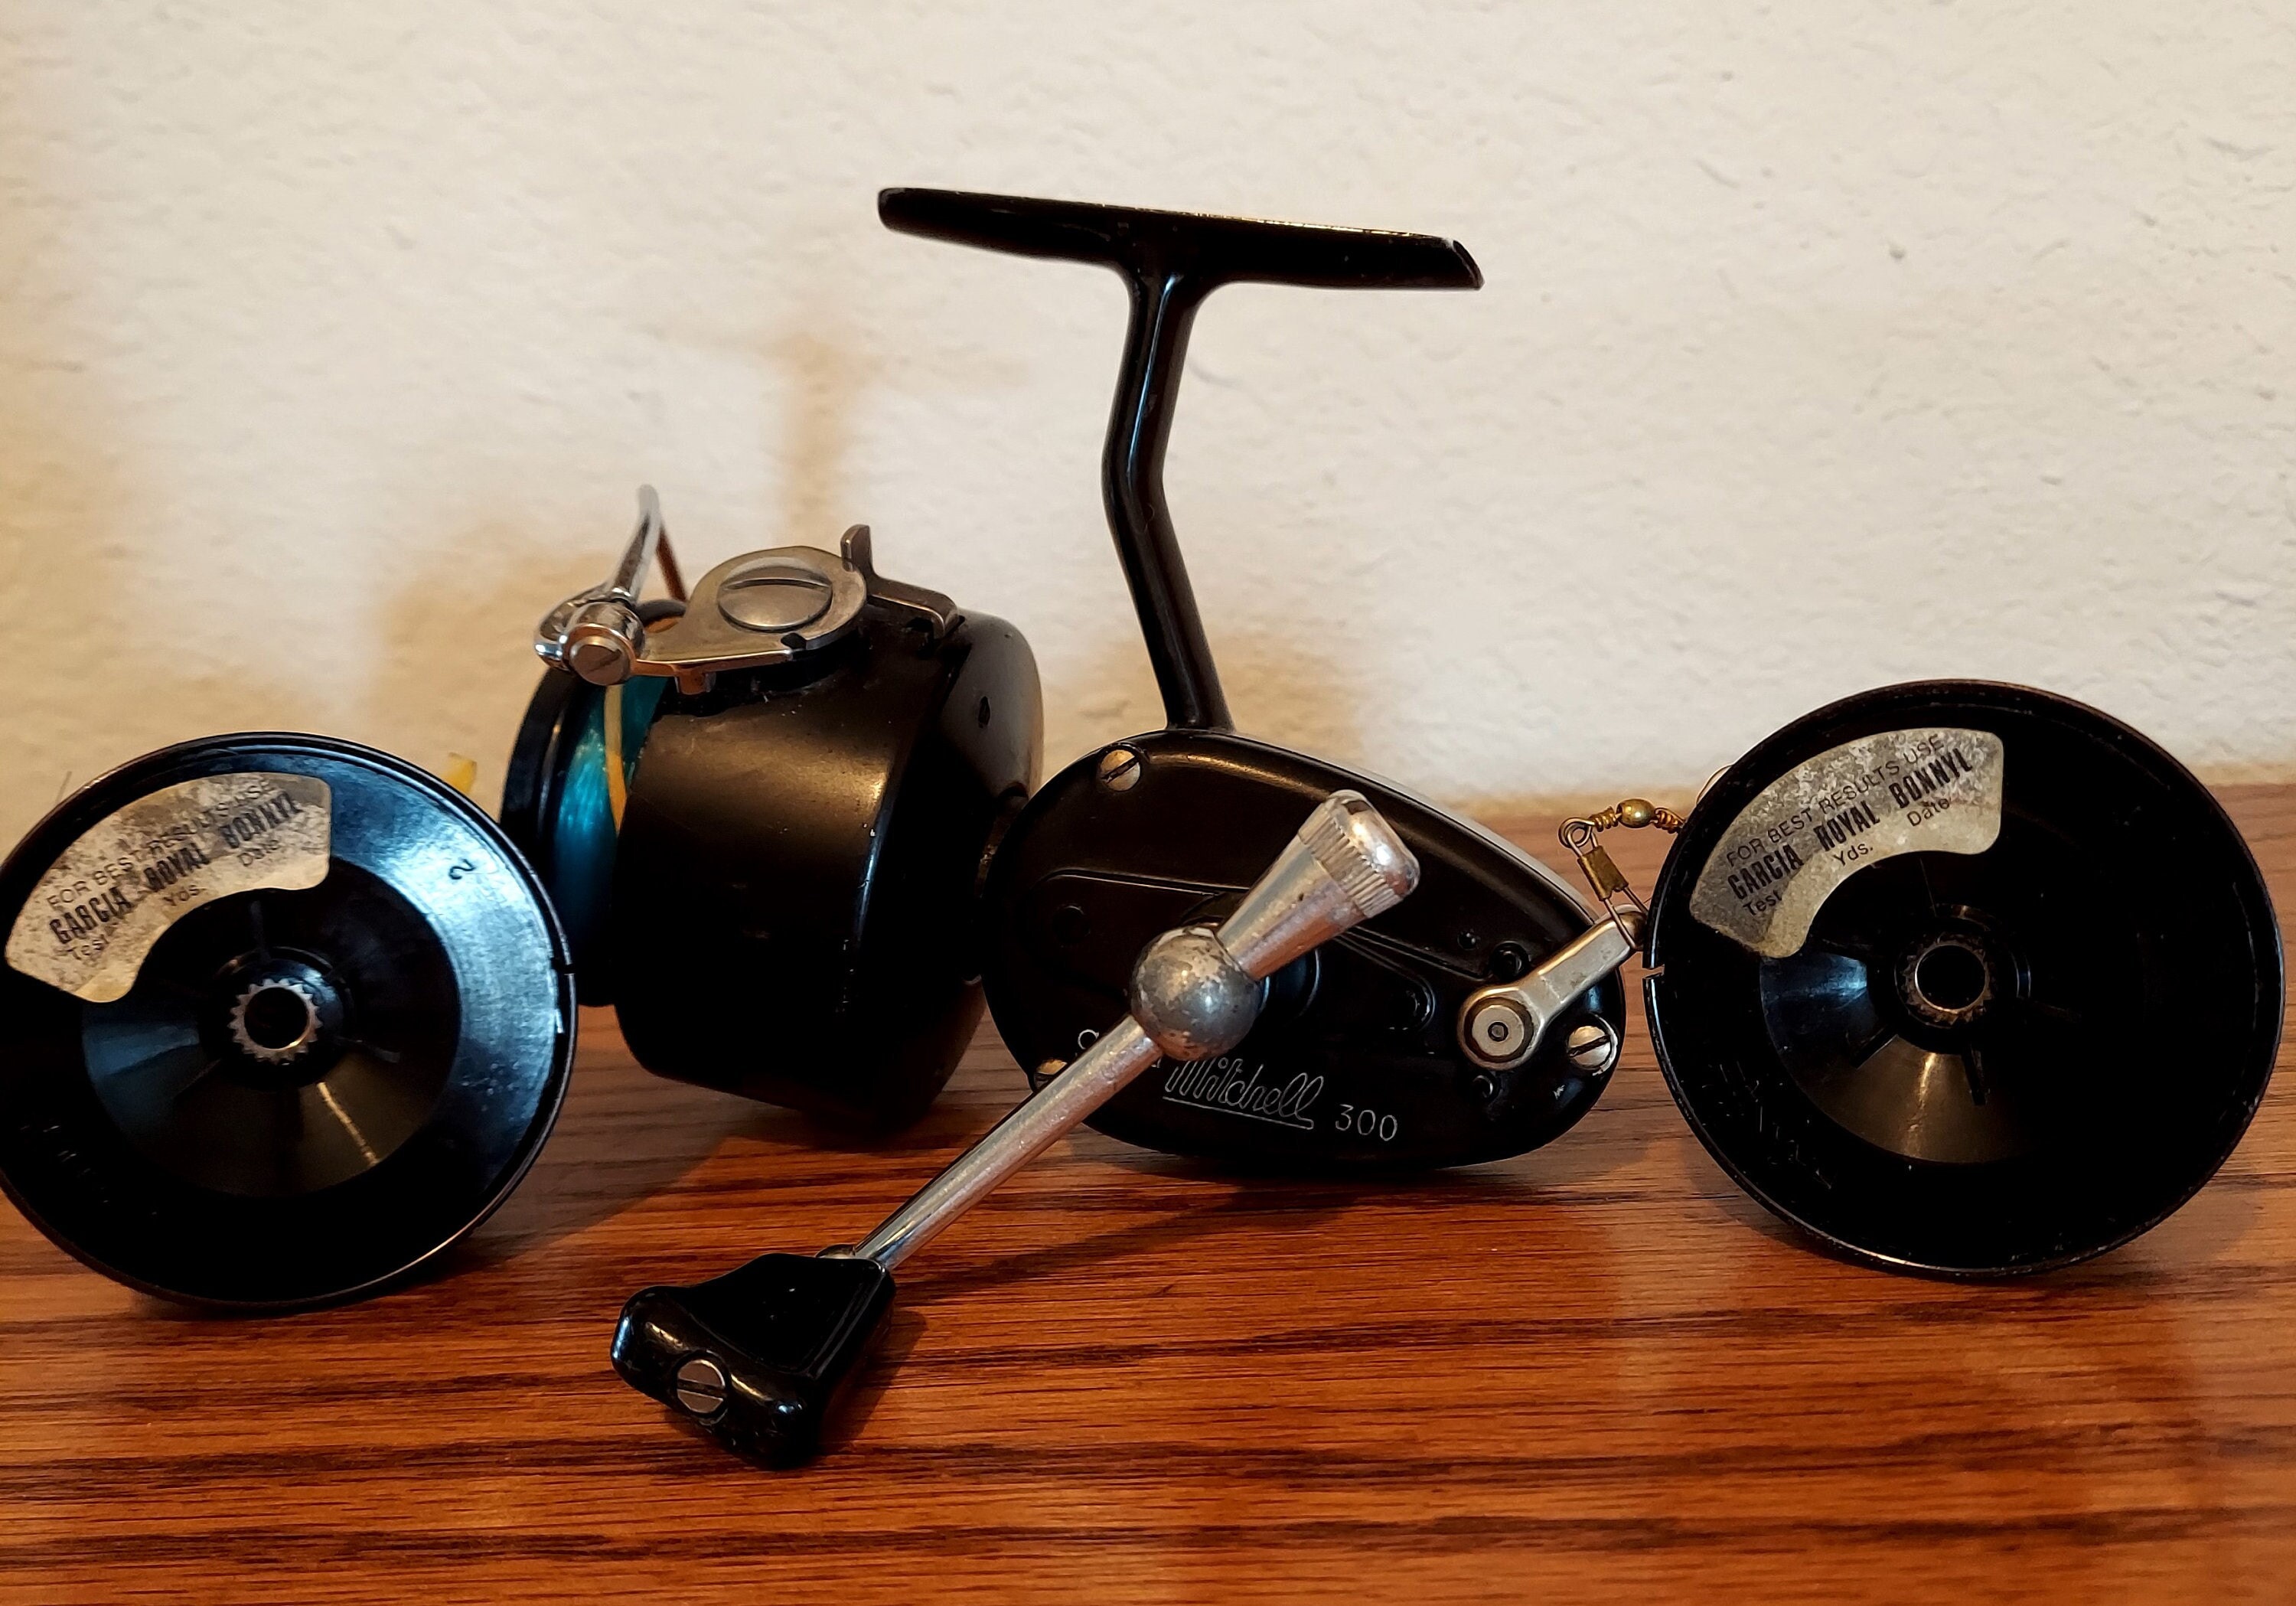 Mitchell Garcia 300 Series Fishing Reel With Two Spools and